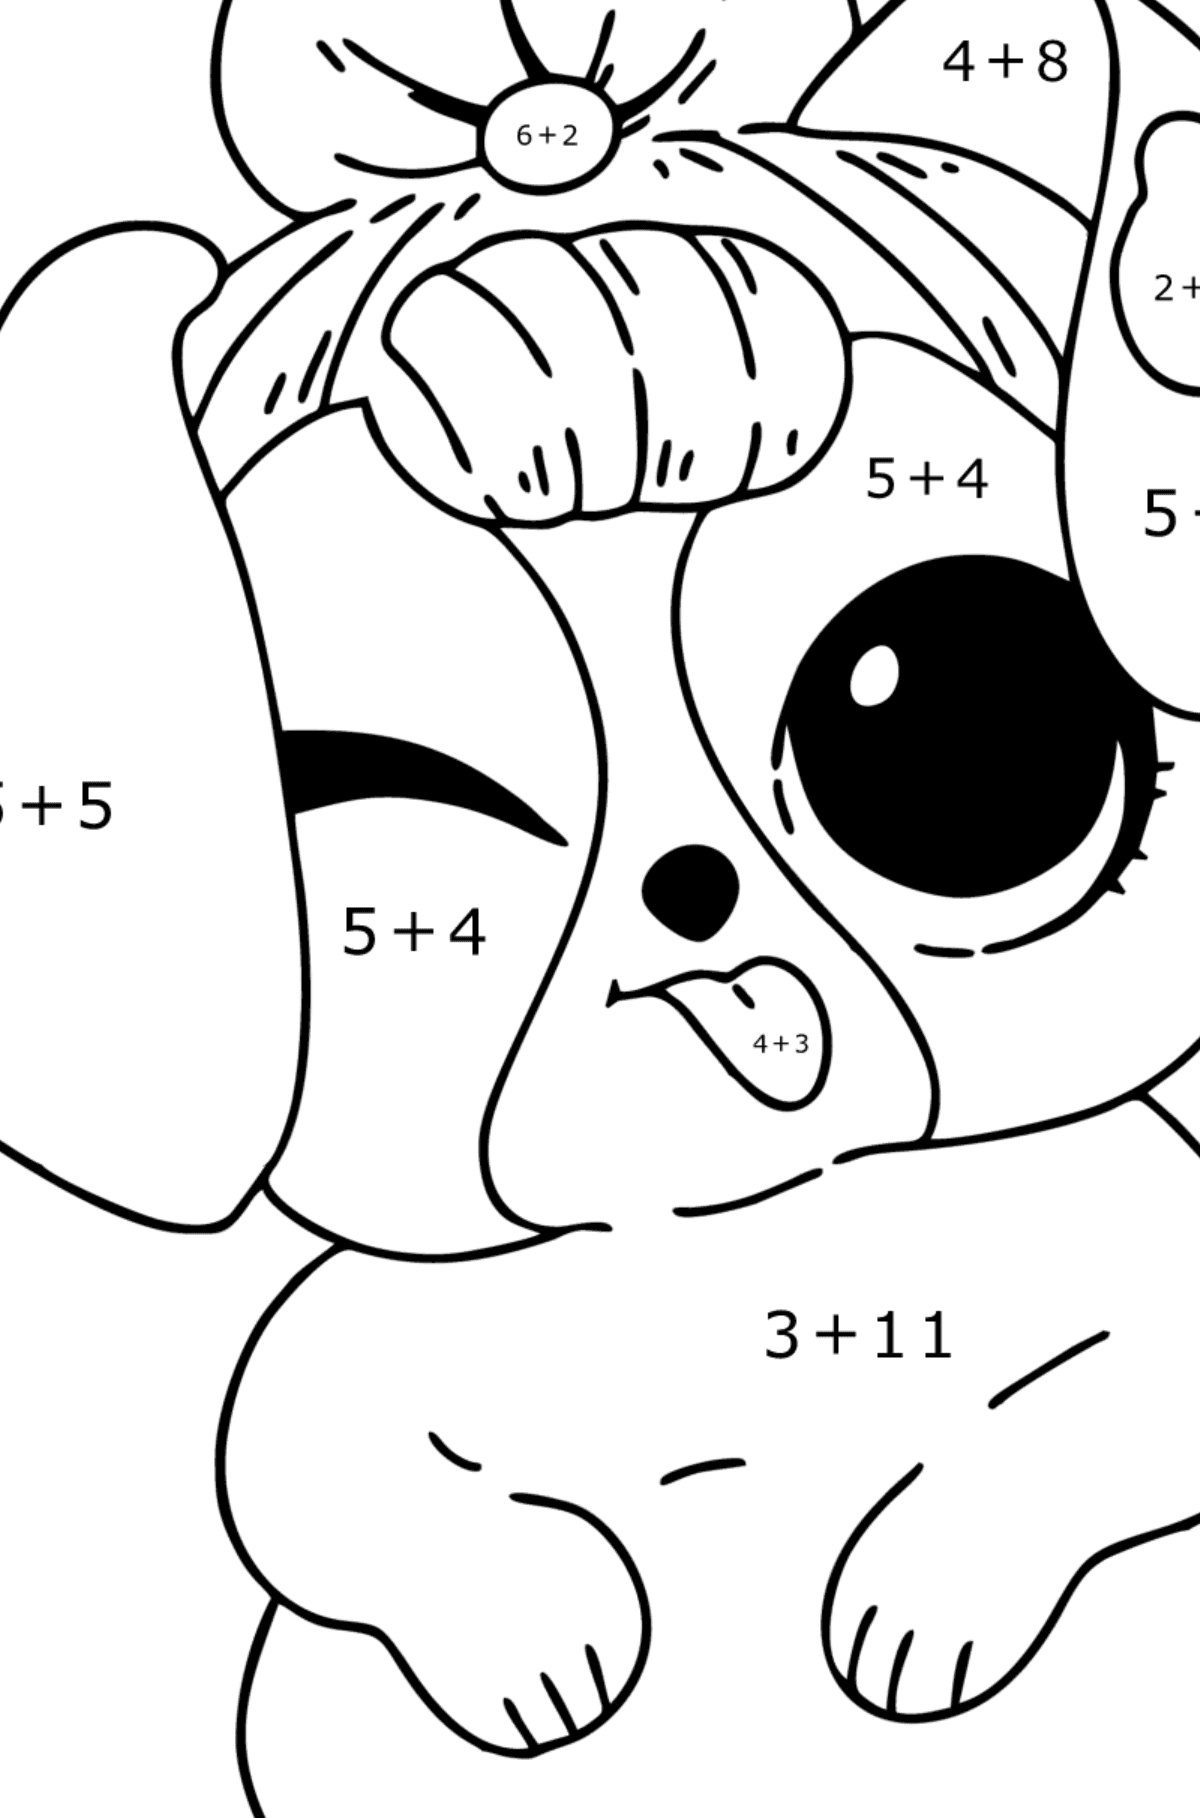 Coloring page LOL pet cute puppy - Math Coloring - Addition for Kids